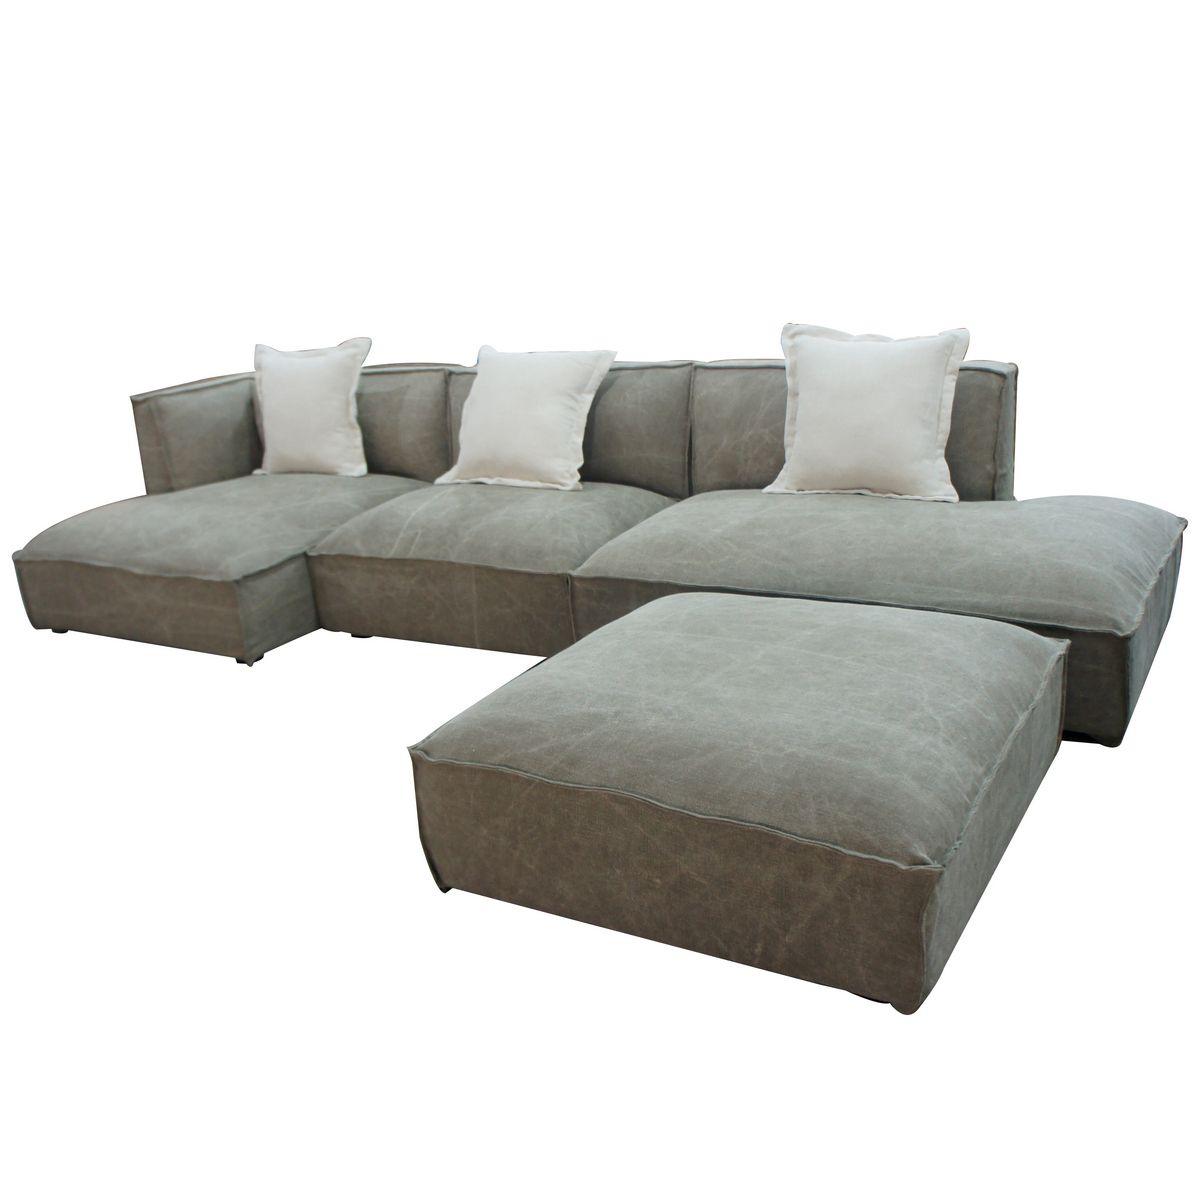 Contemporary, Modern Sectional Sofa VGUIMY623 VGUIMY623 in Beige Fabric